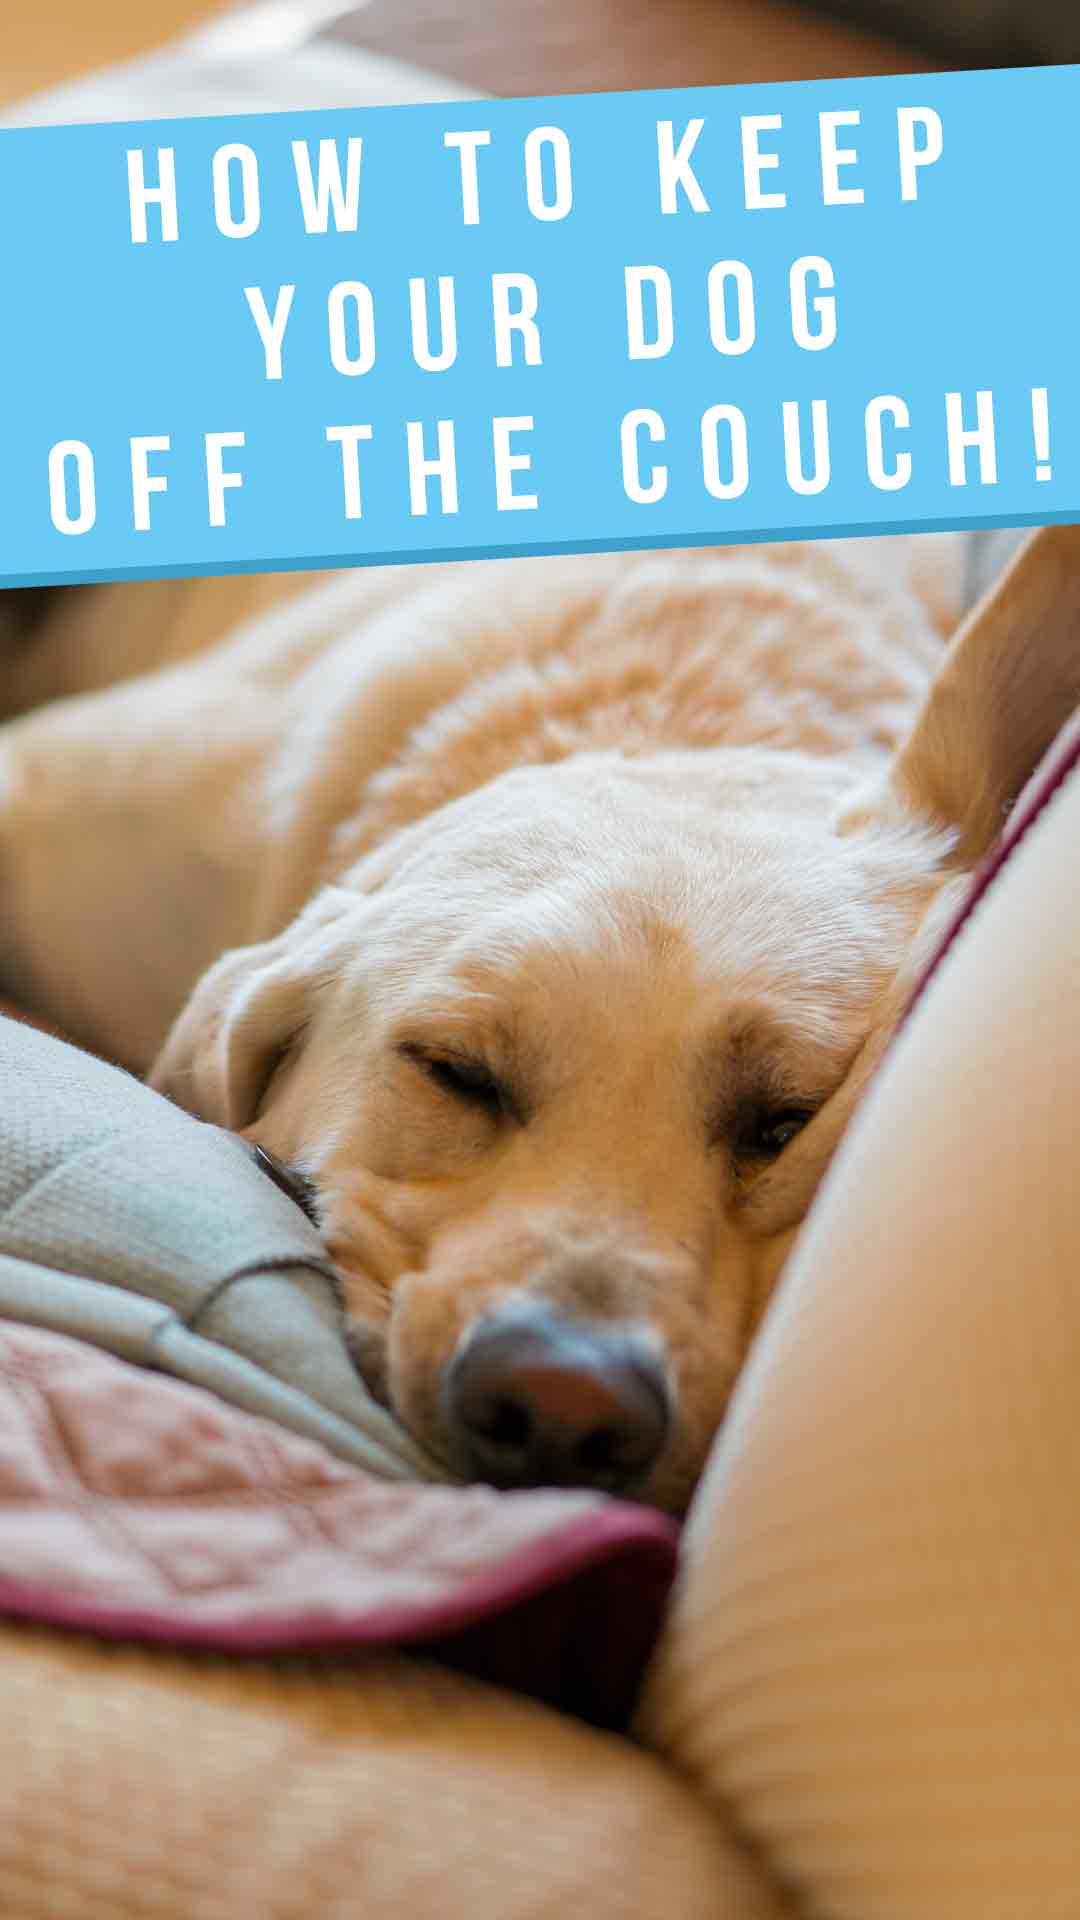 How Do You Keep A Dog Off The Couch Decent Verified Command For Dog ...